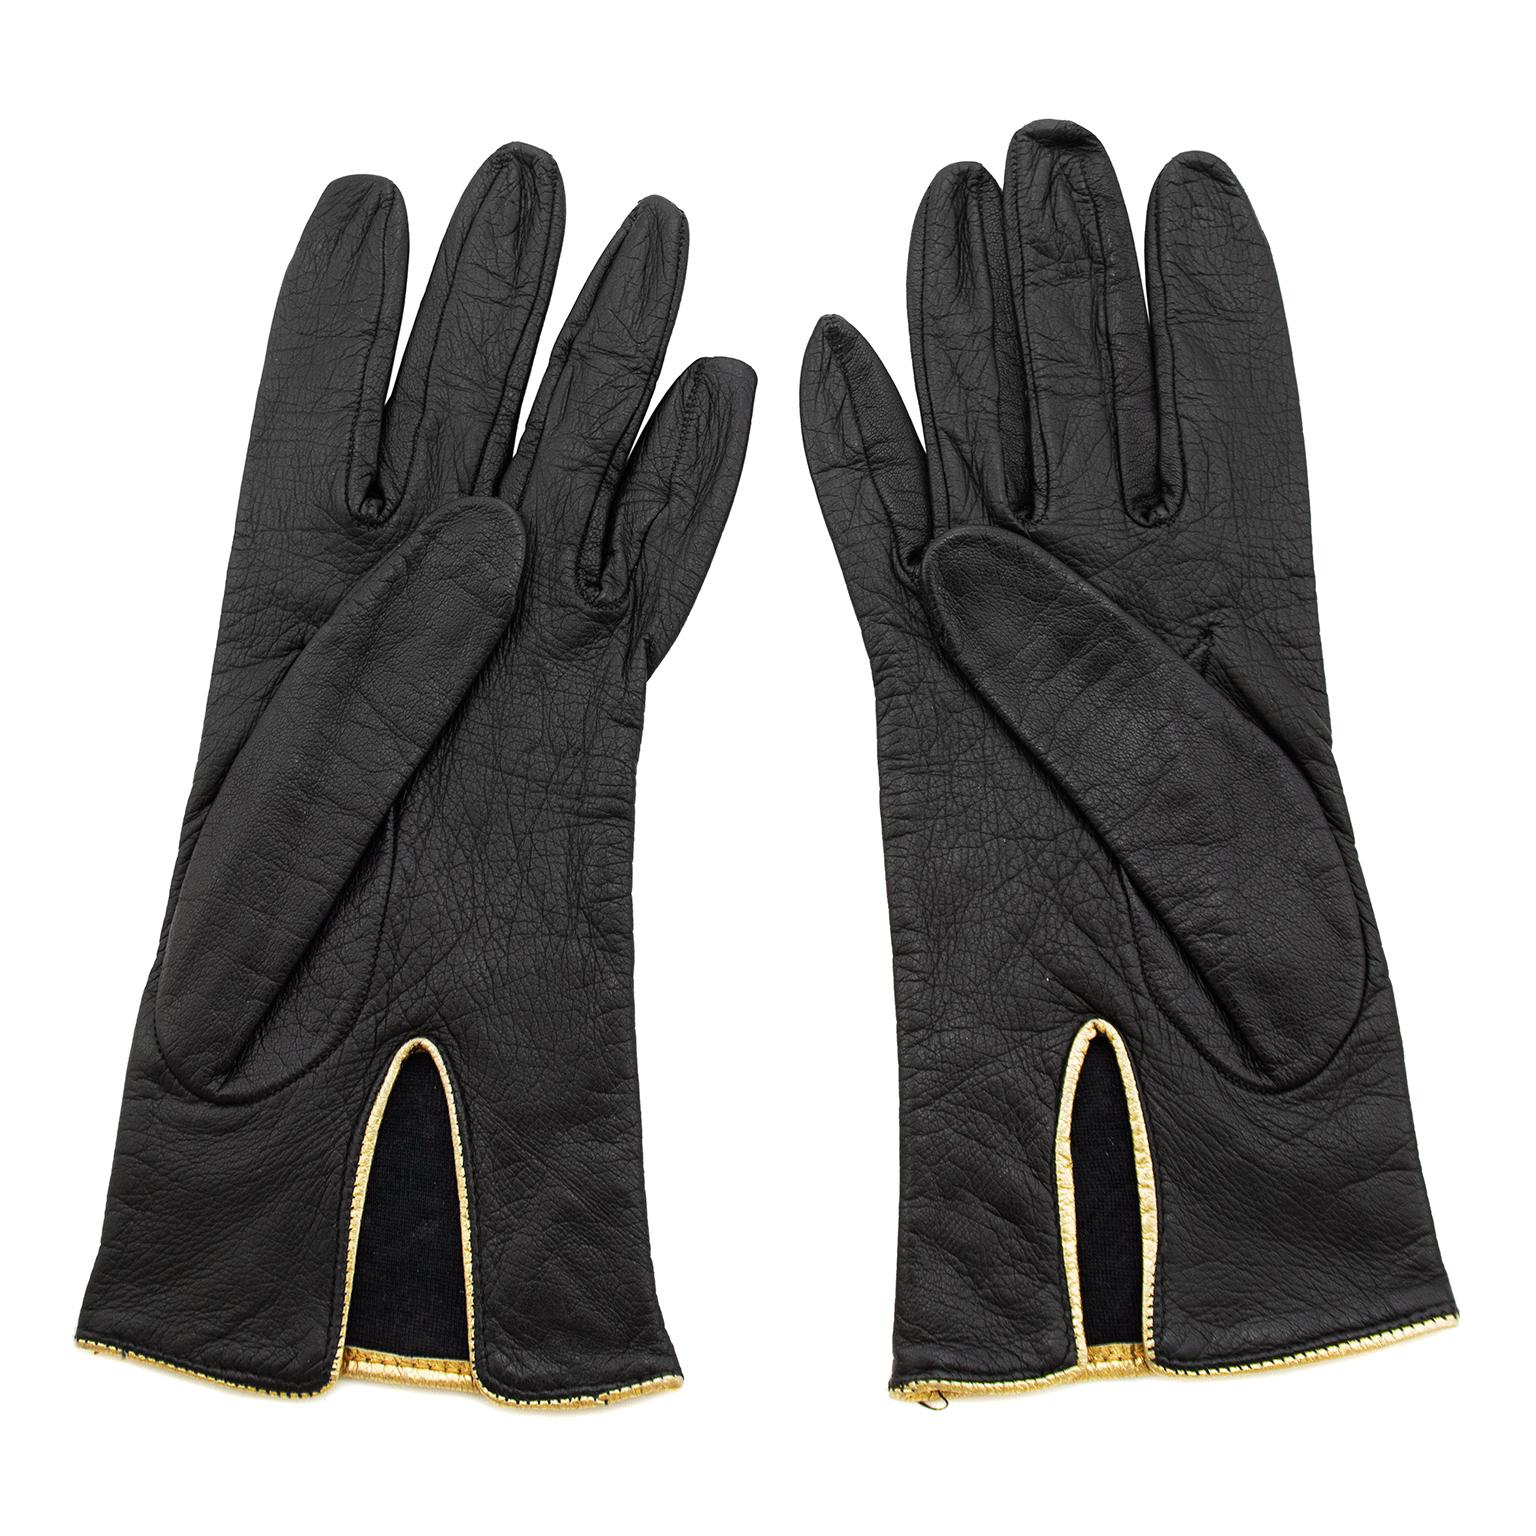 Gorgeous Yves Saint Laurent black leather gloves from the 1980s. Contrasting gold trim and gold studs. Lined in 100% silk. Made in Italy. Excellent vintage condition. Fit like a US 7 which is small.